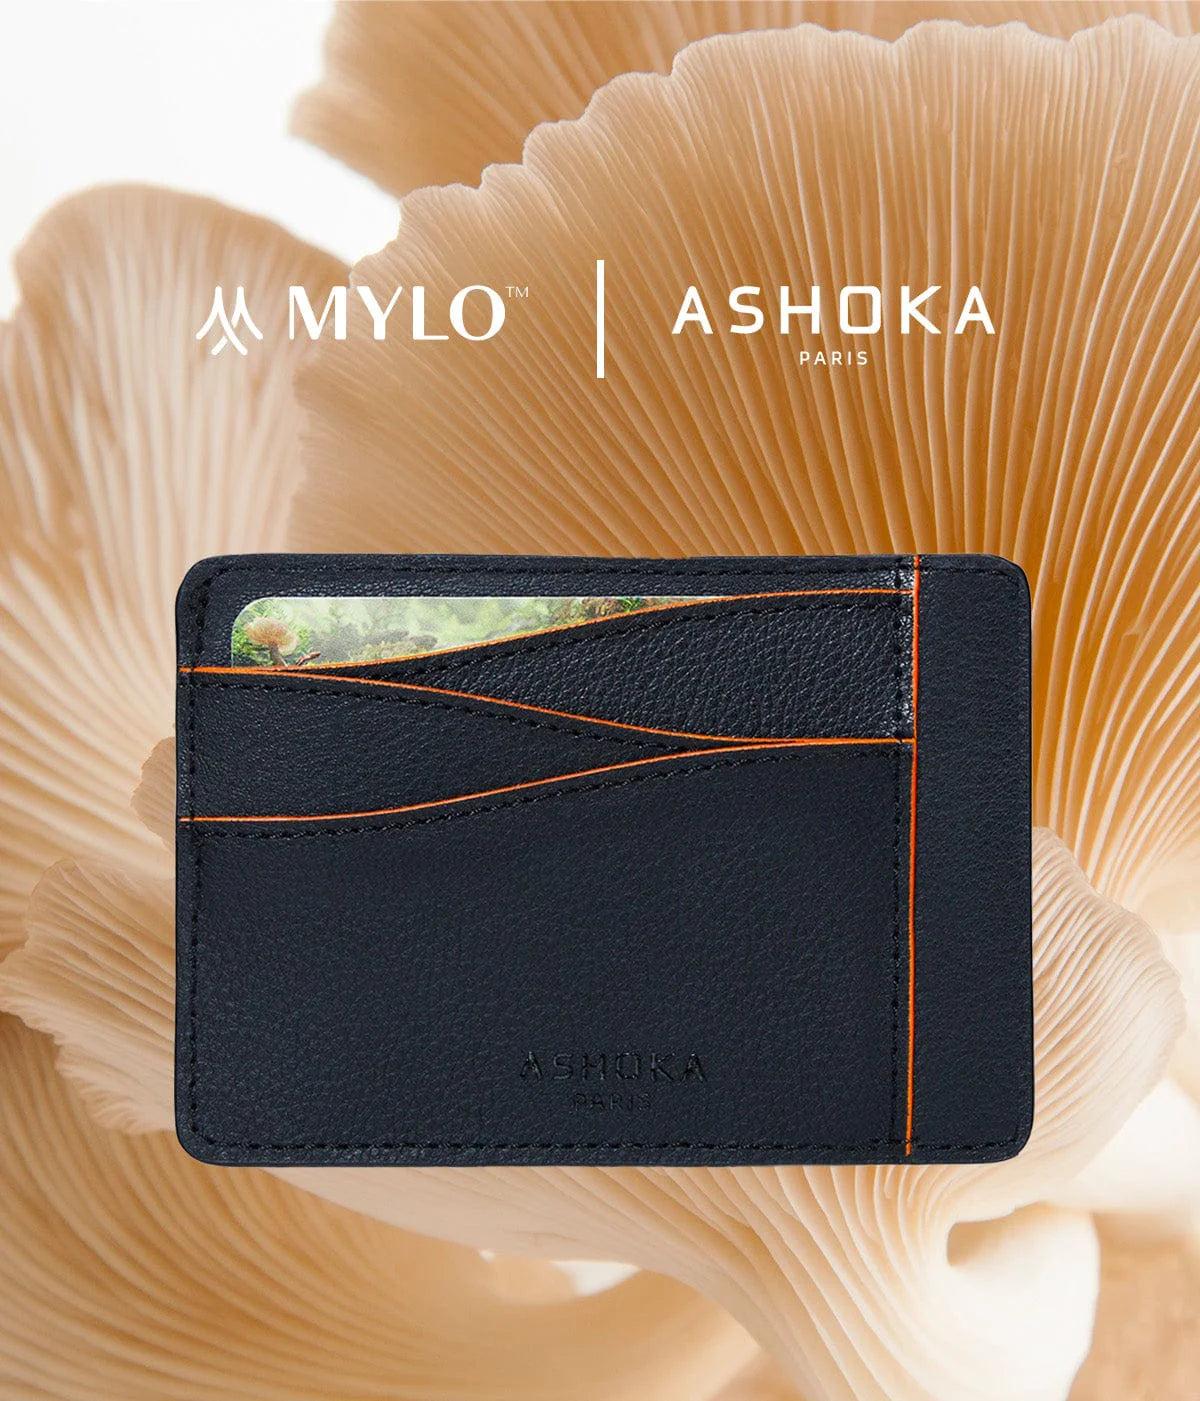 Mushroom Vegan Leather Made With Mycelium: Will Shoppers Care